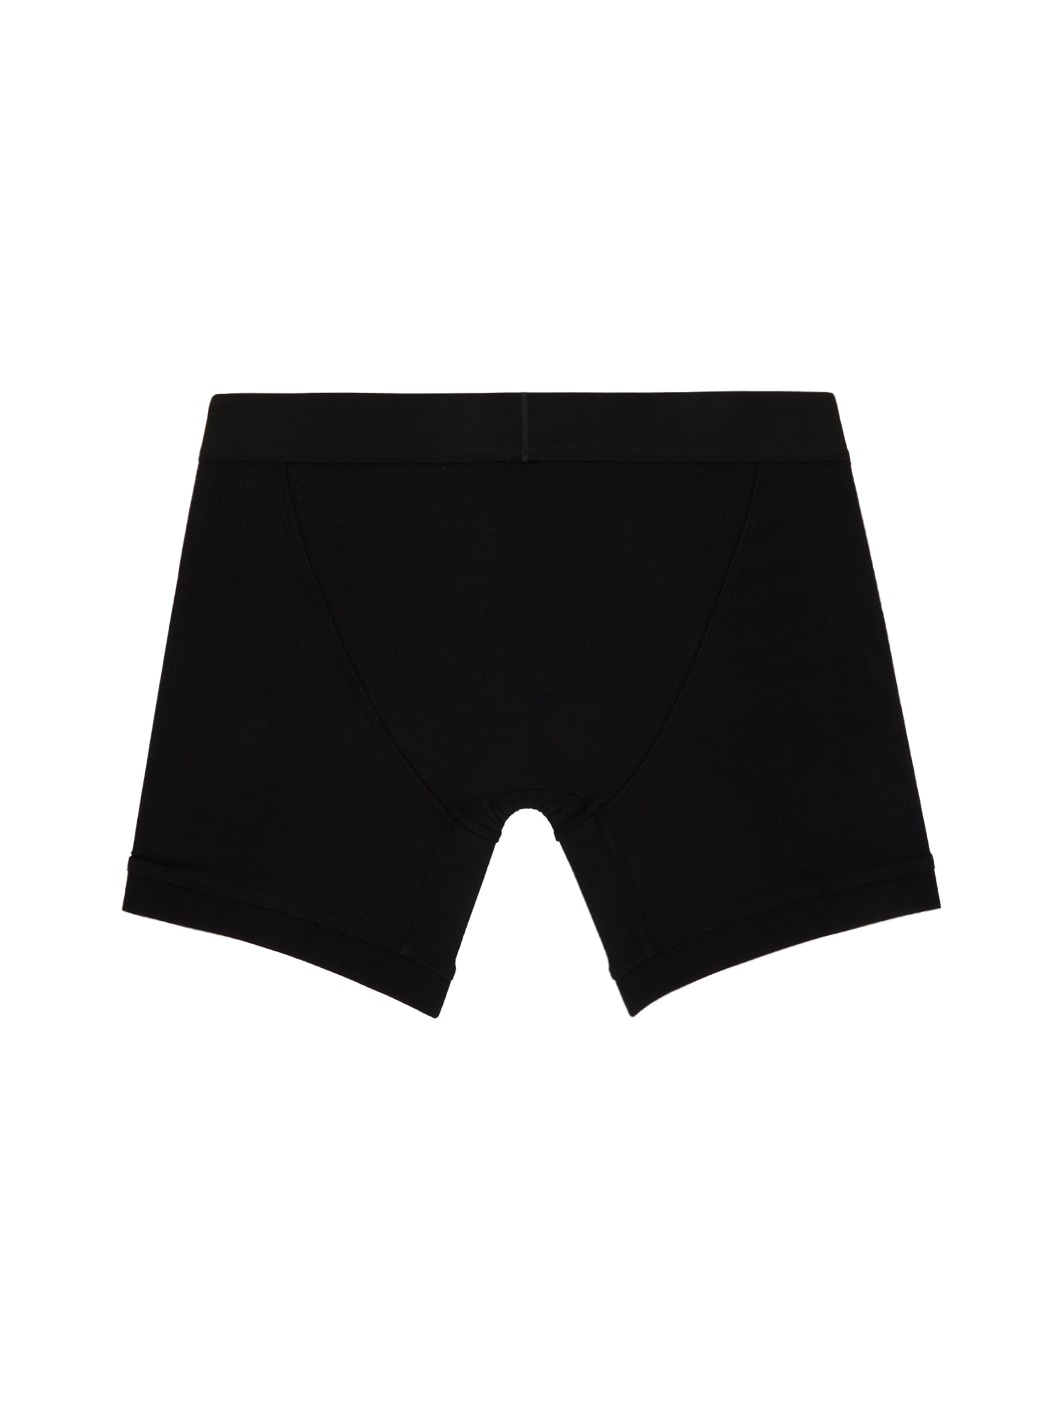 Two-Pack Black Boxer Briefs - 3